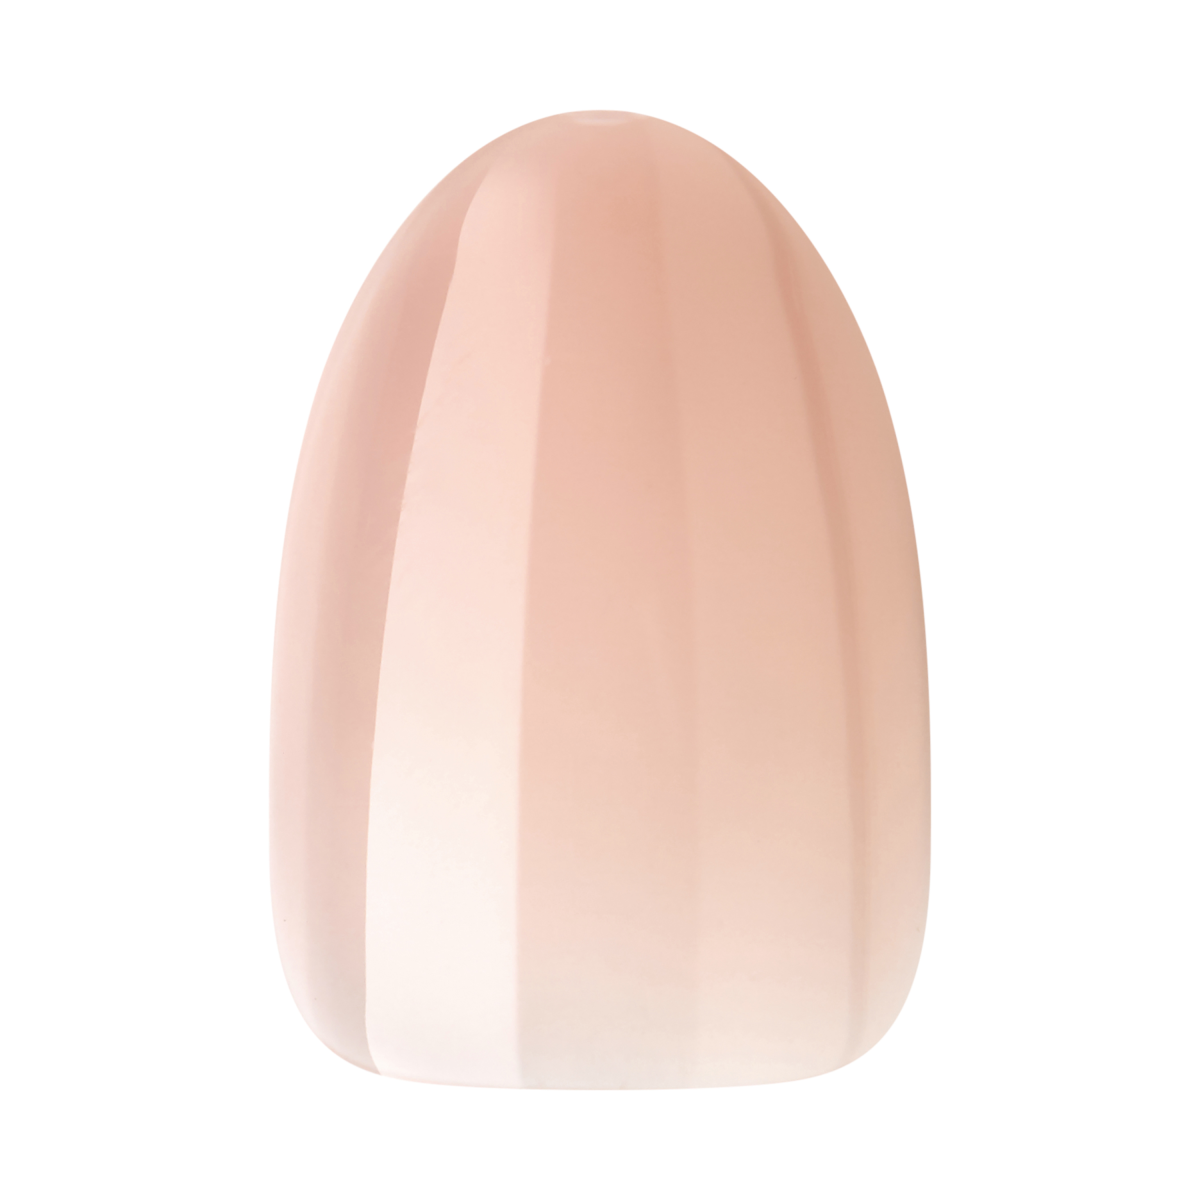 KISS Bare But Better, Press-On Nails, Slay, Beige, Short Almond, 30ct